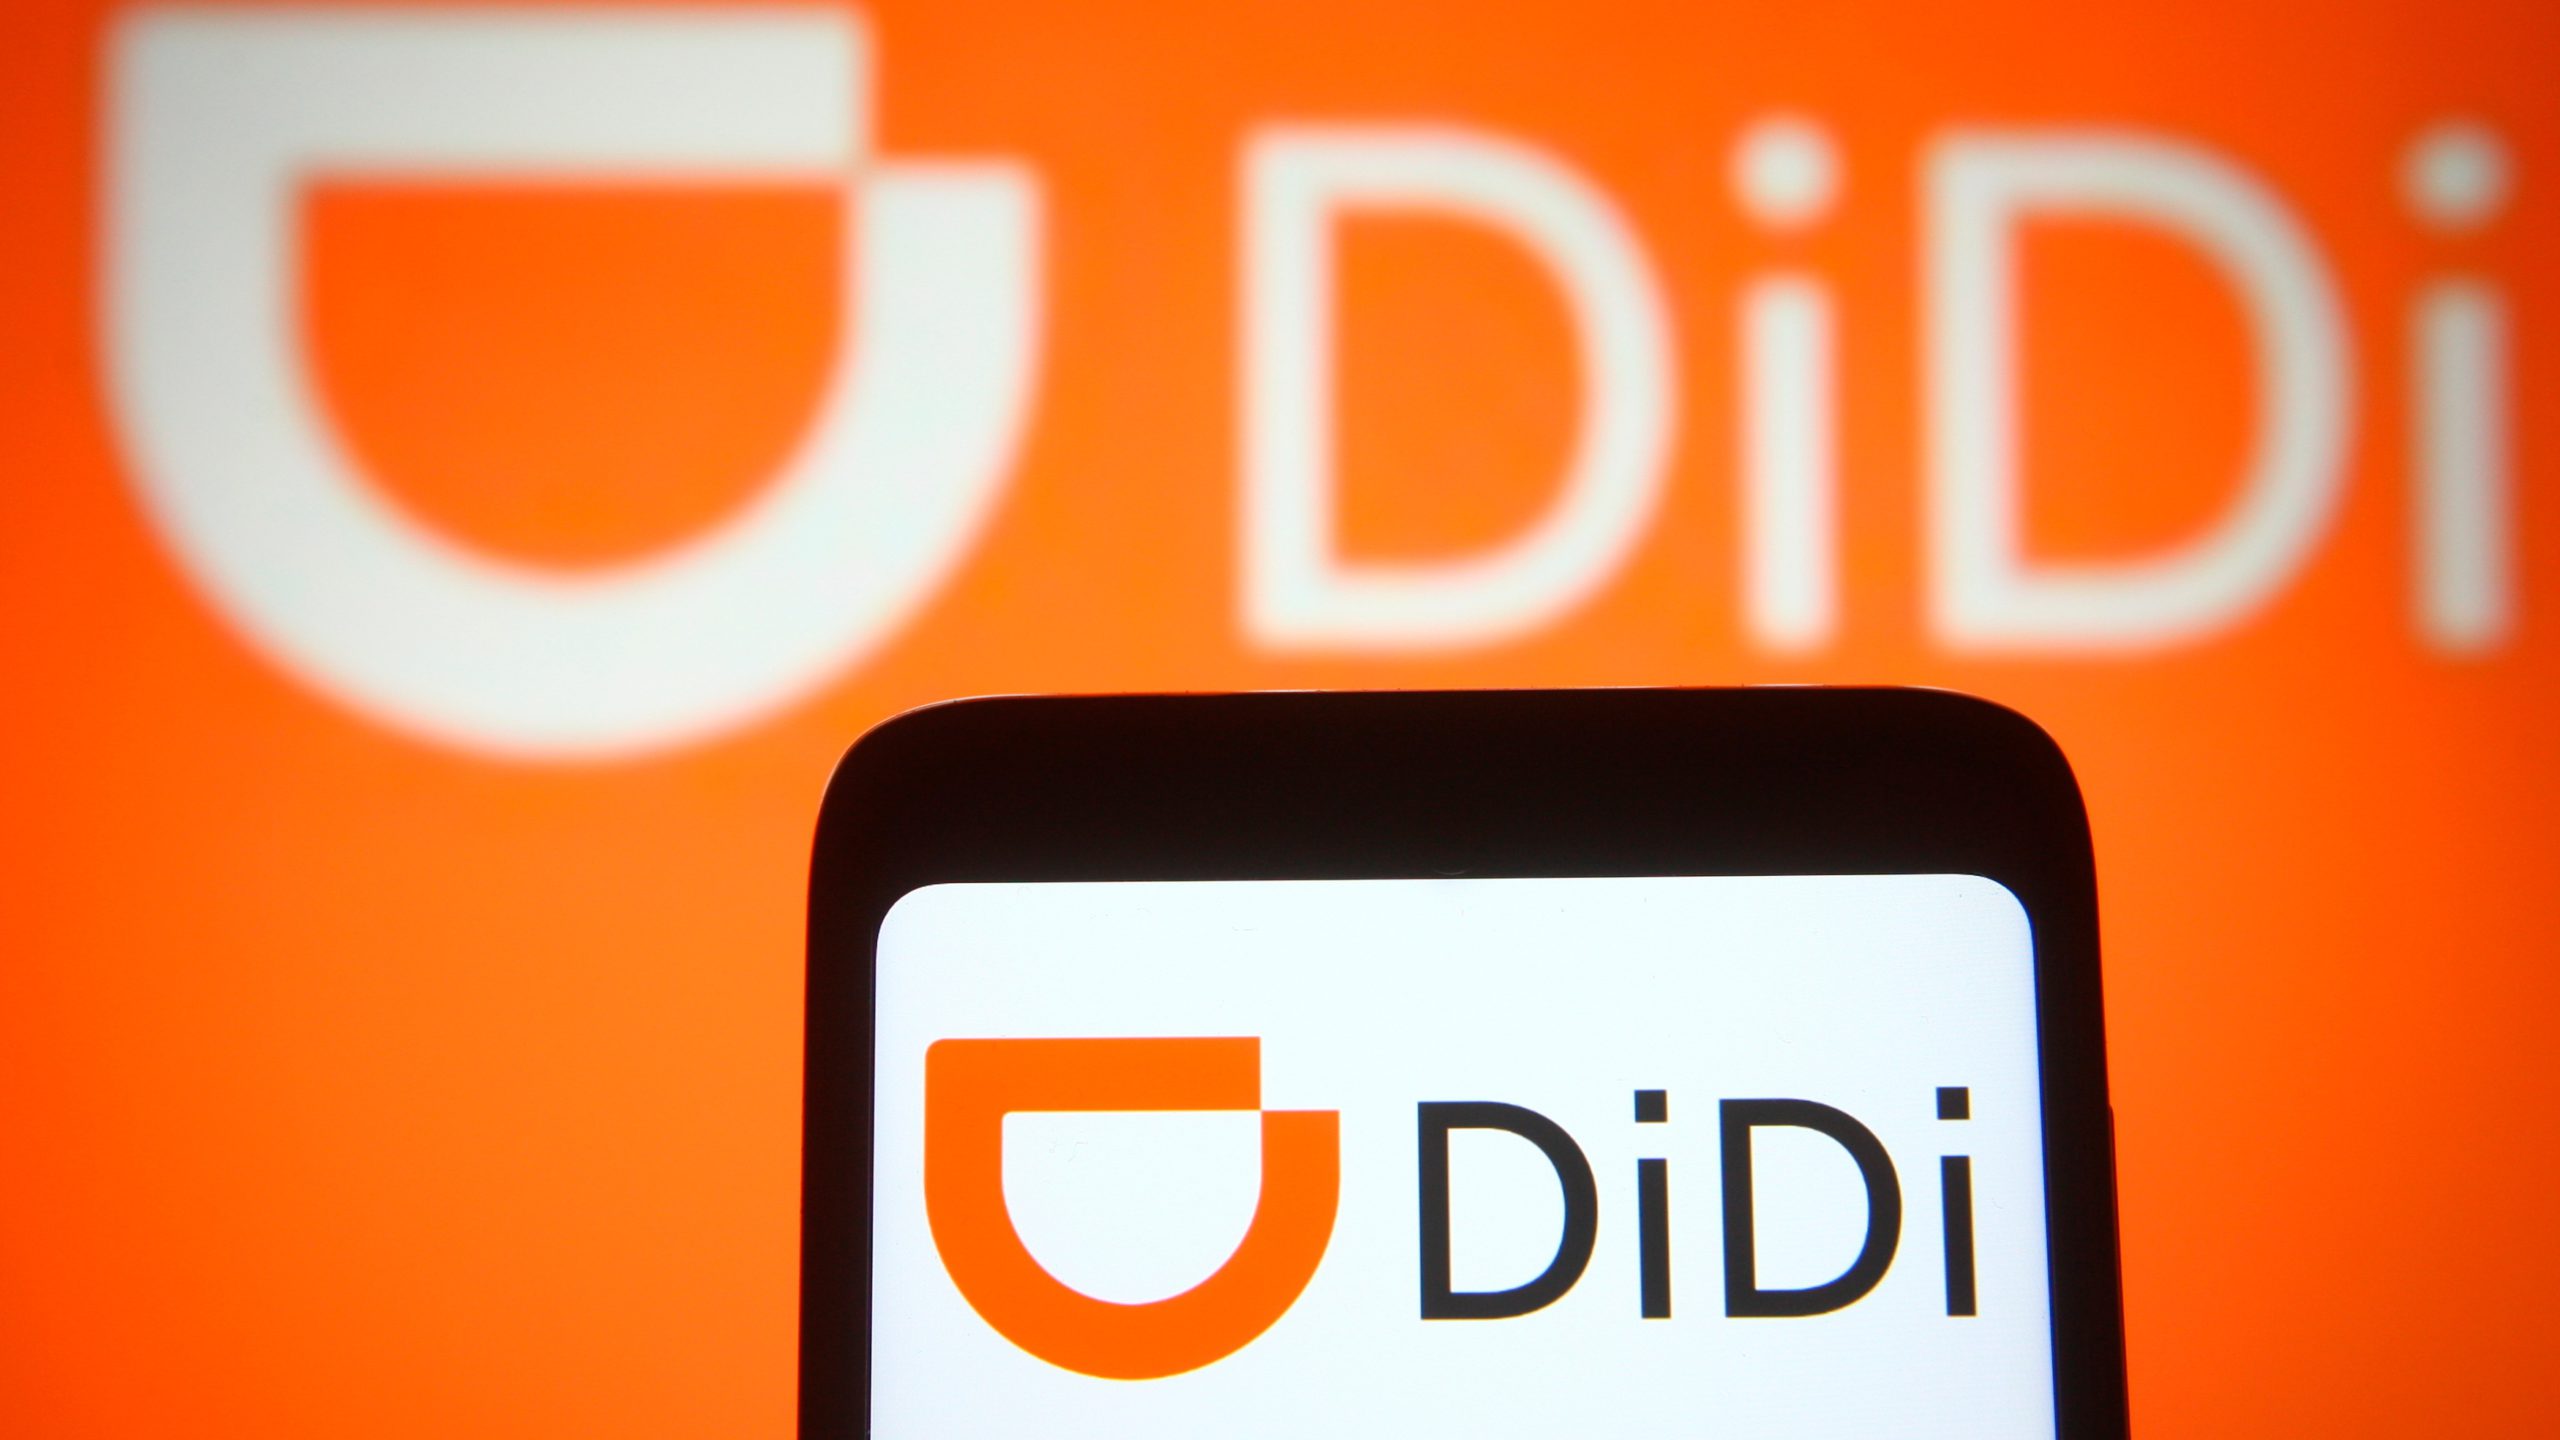 Didi shoots for a conservative $67 billion valuation in its upcoming IPO